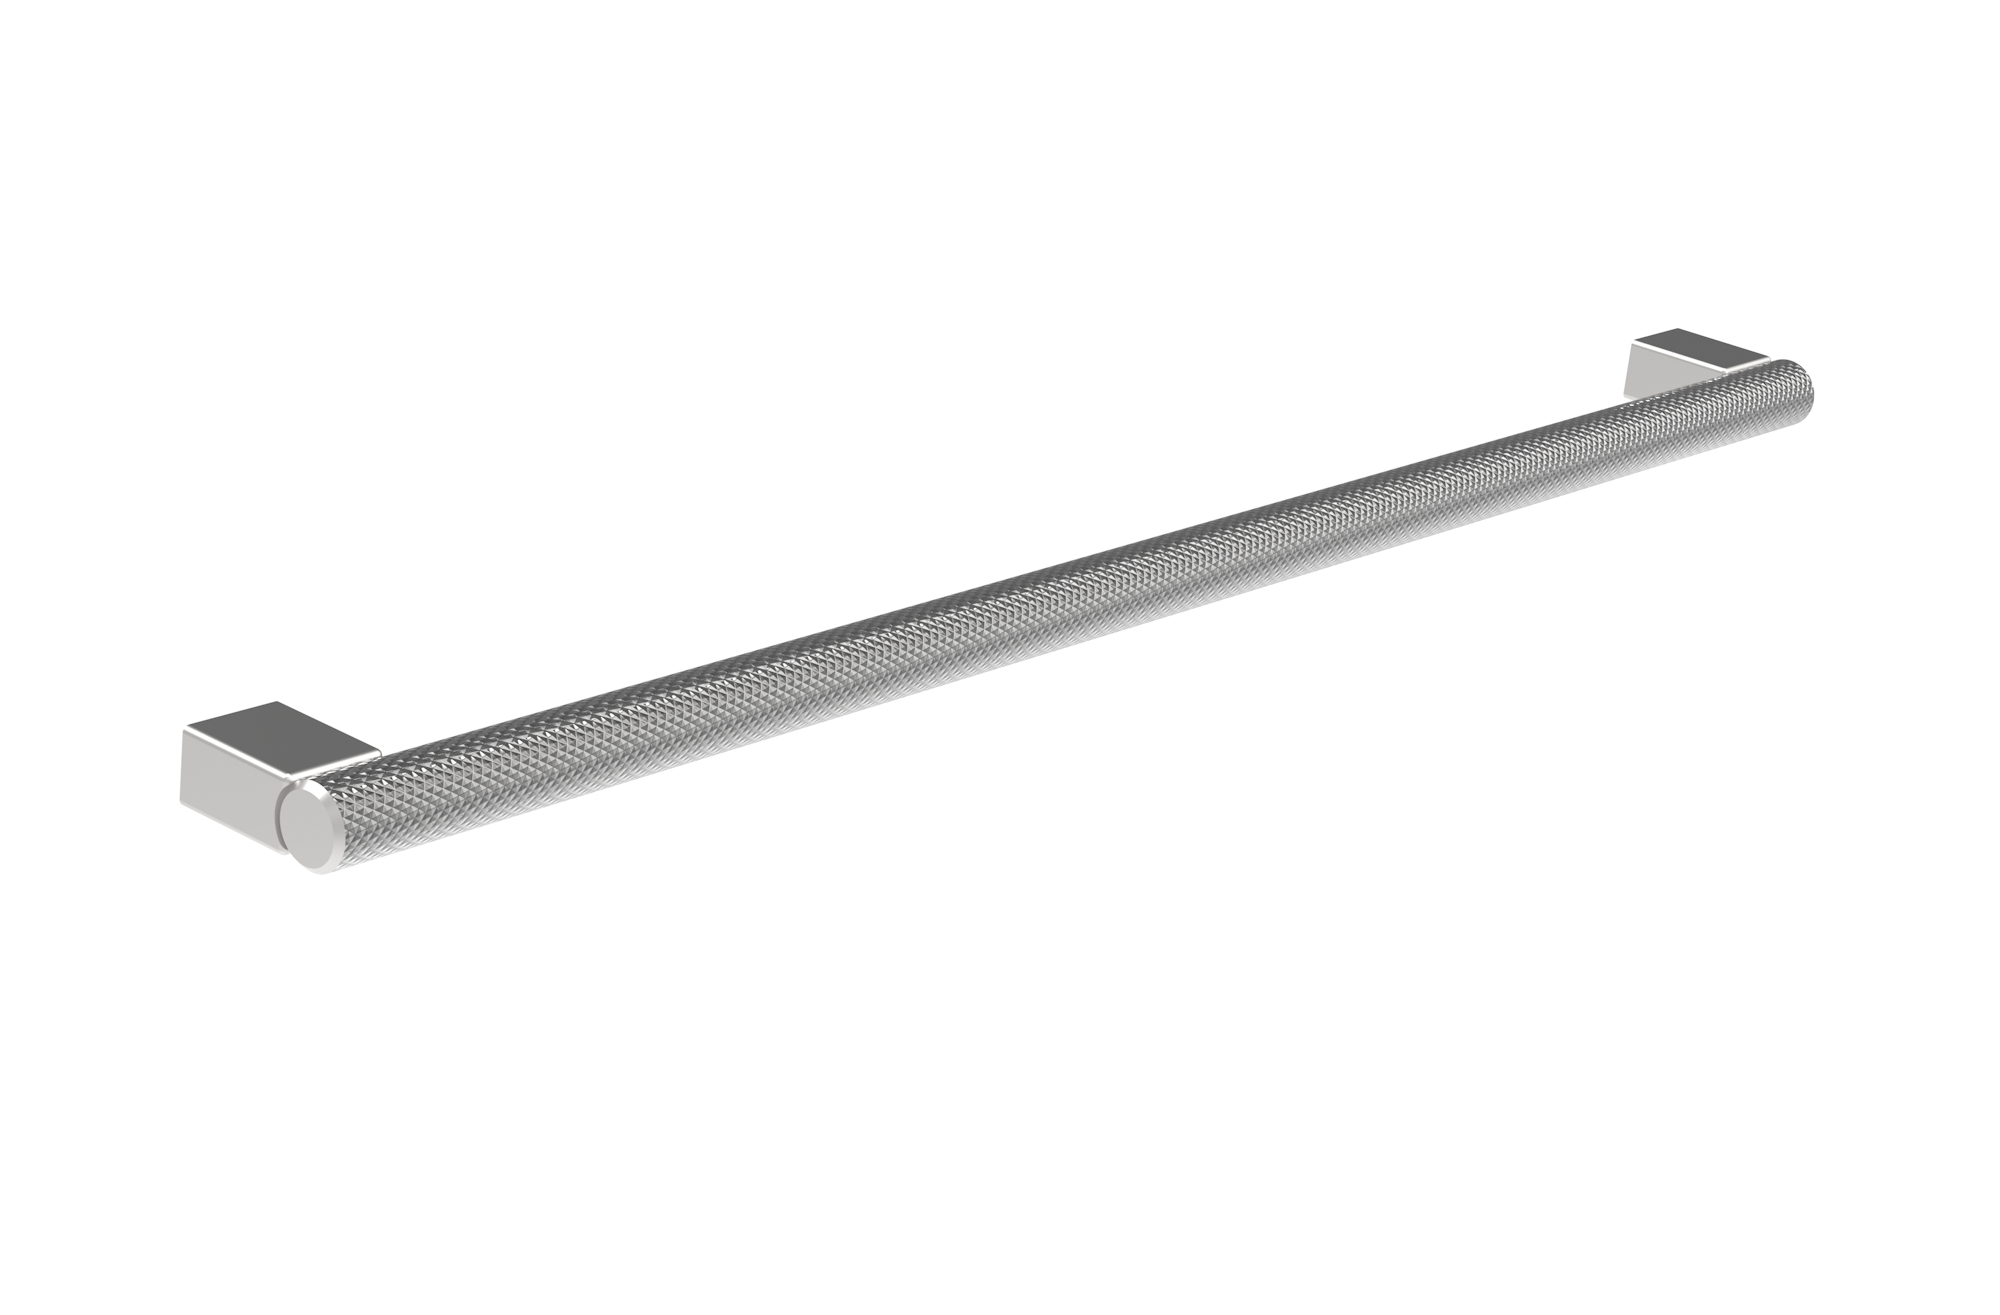 MADRID 346mm knurled handle - Stainless Steel - 320mm Centres